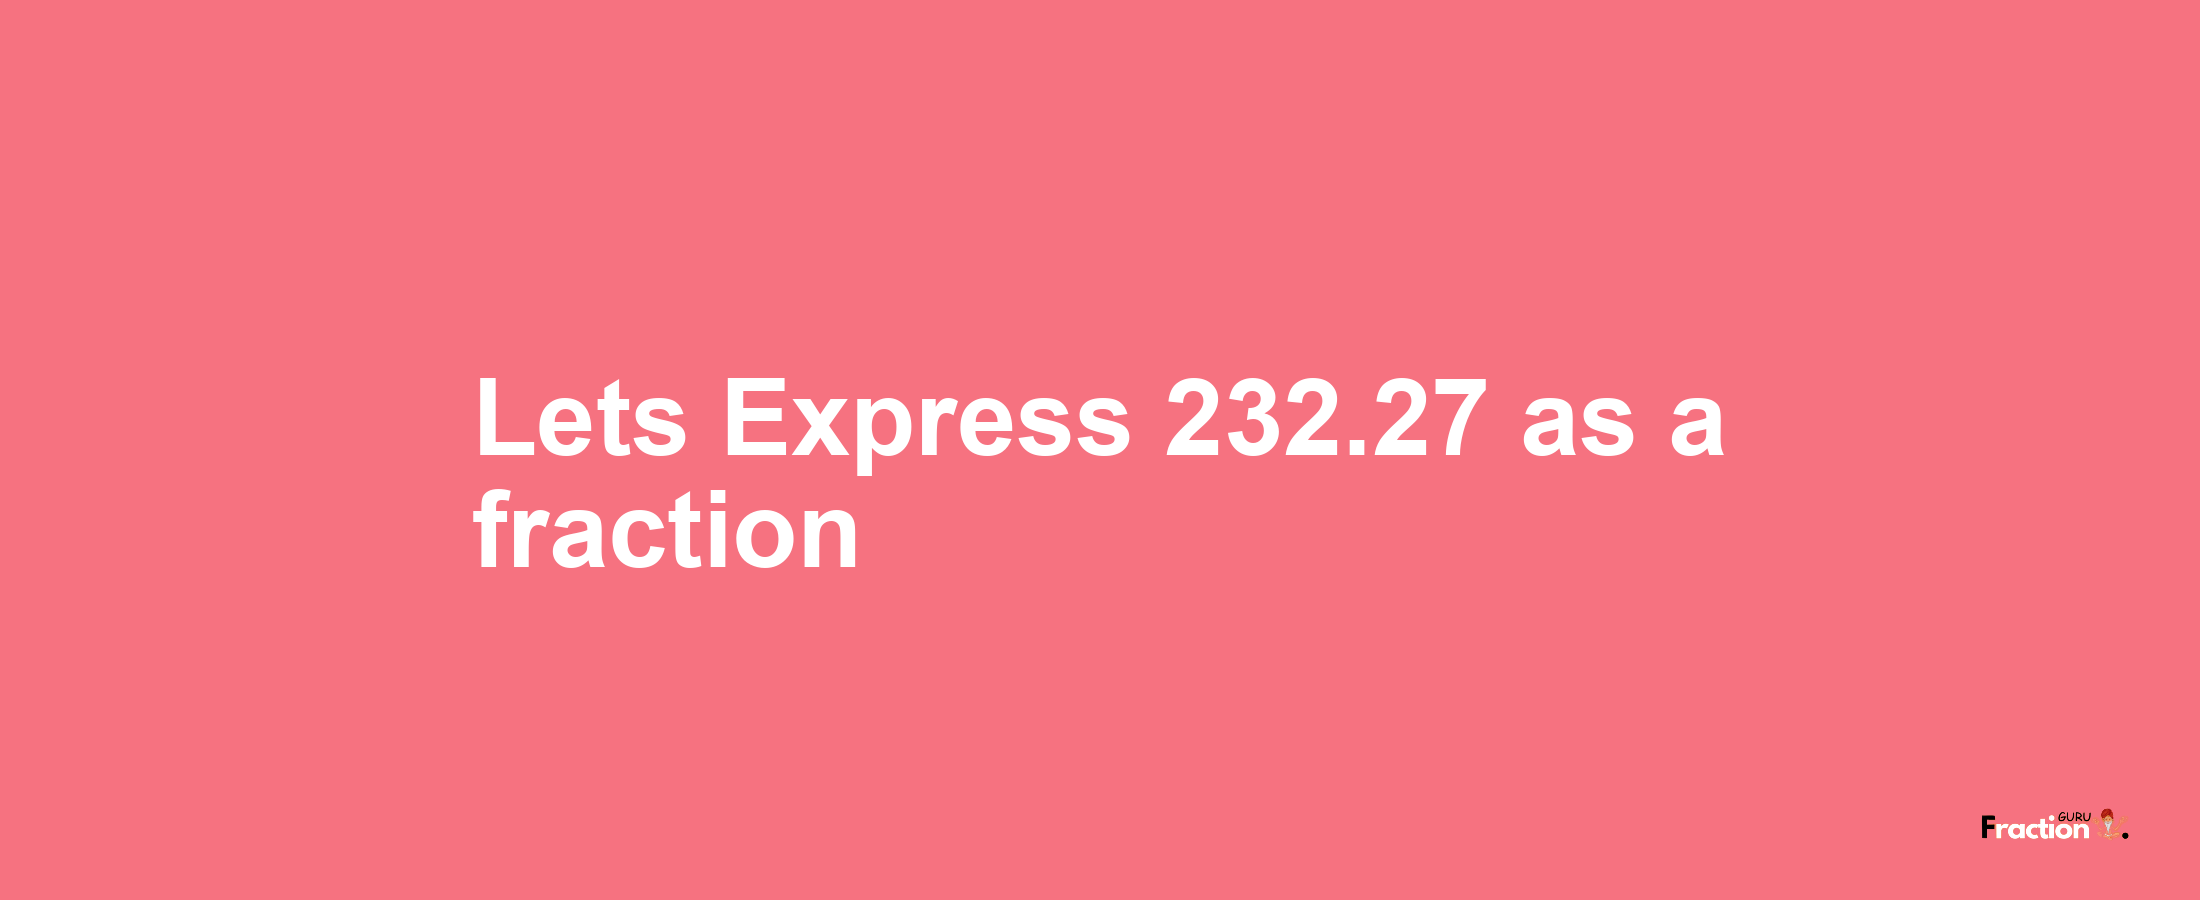 Lets Express 232.27 as afraction